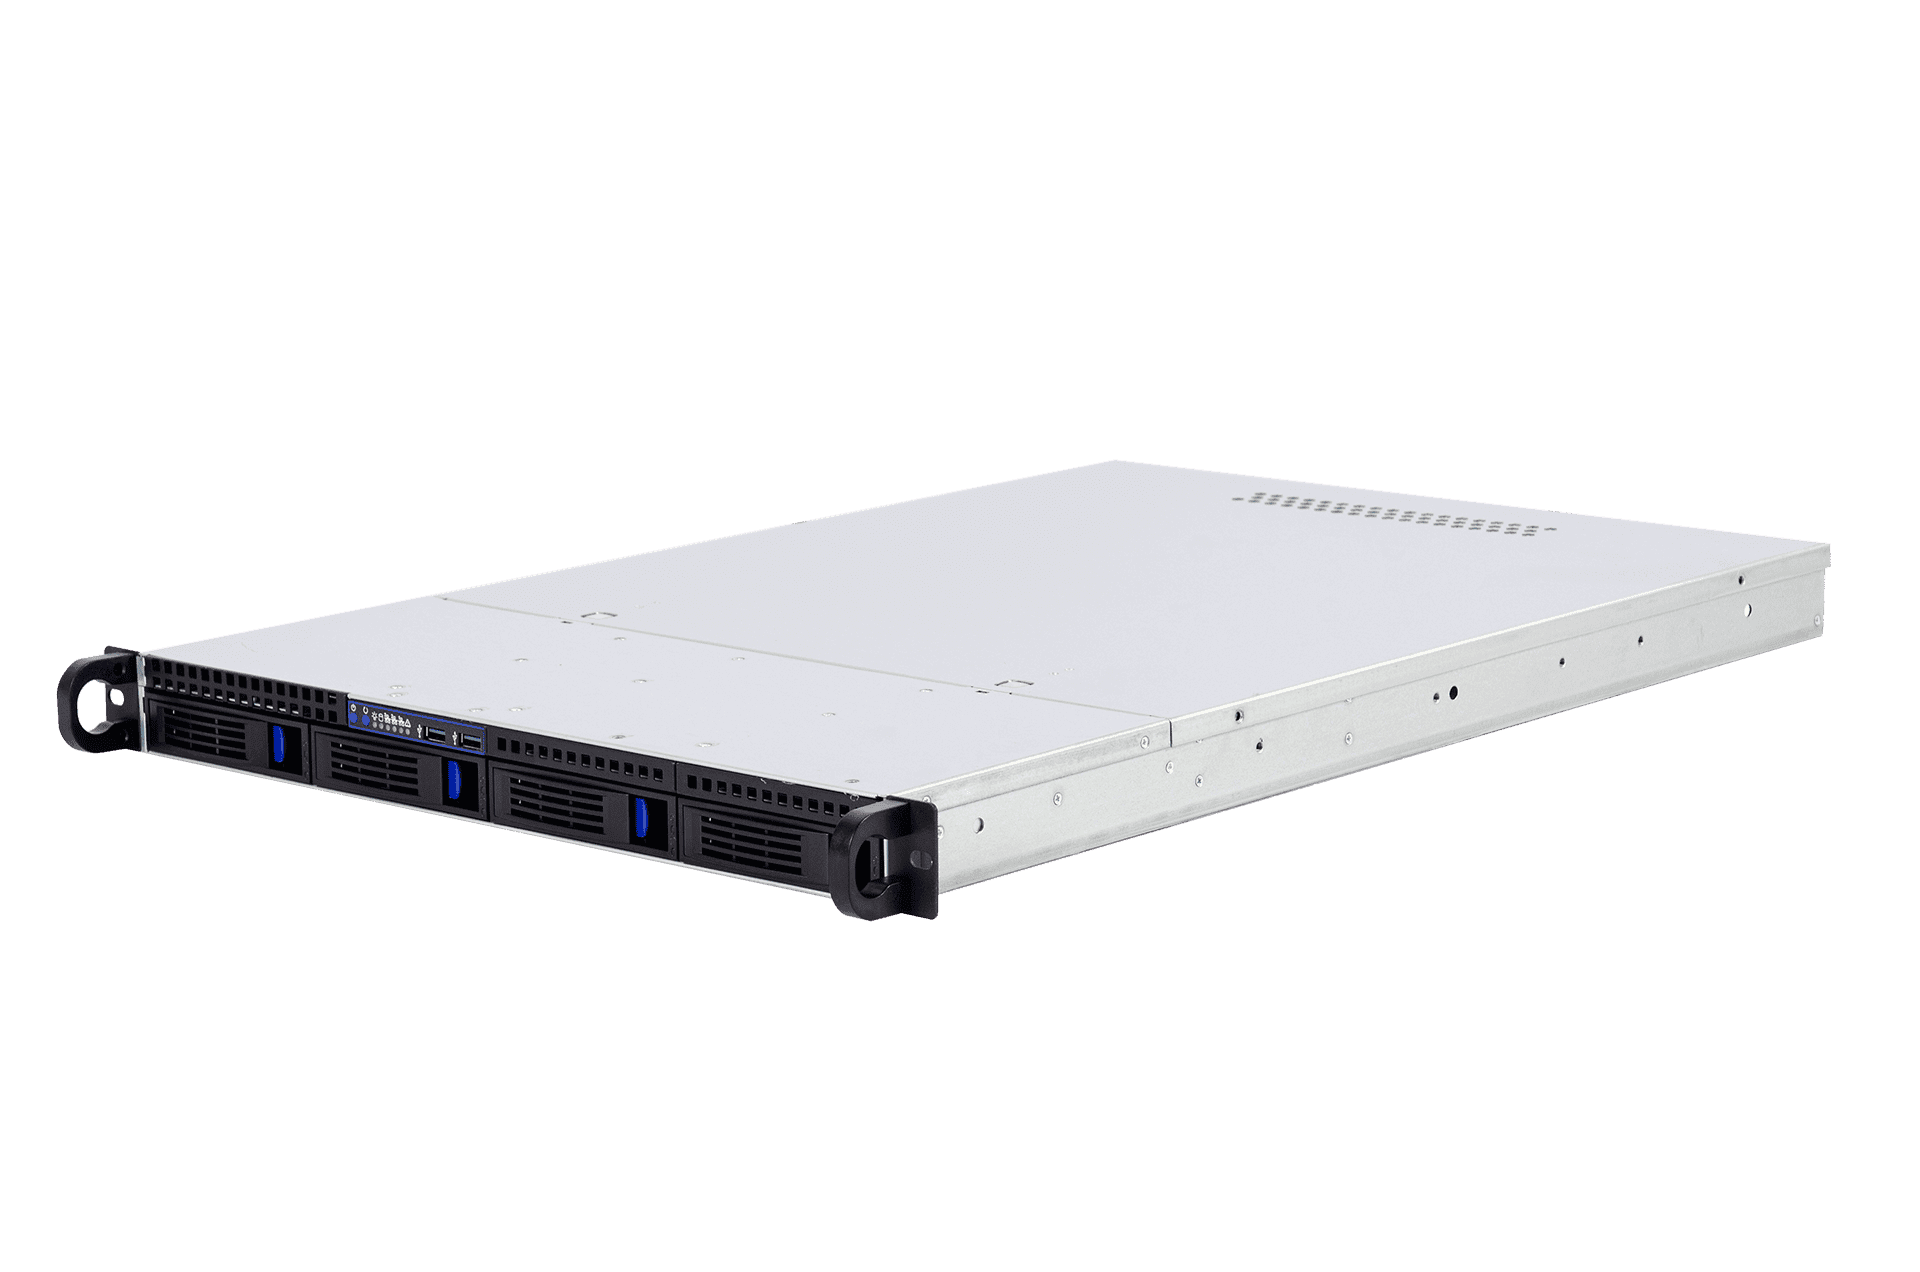 Server Chassis 1U 4 hard drive bays Hot-Swap for motherboard size up to 12"x13" backplane w